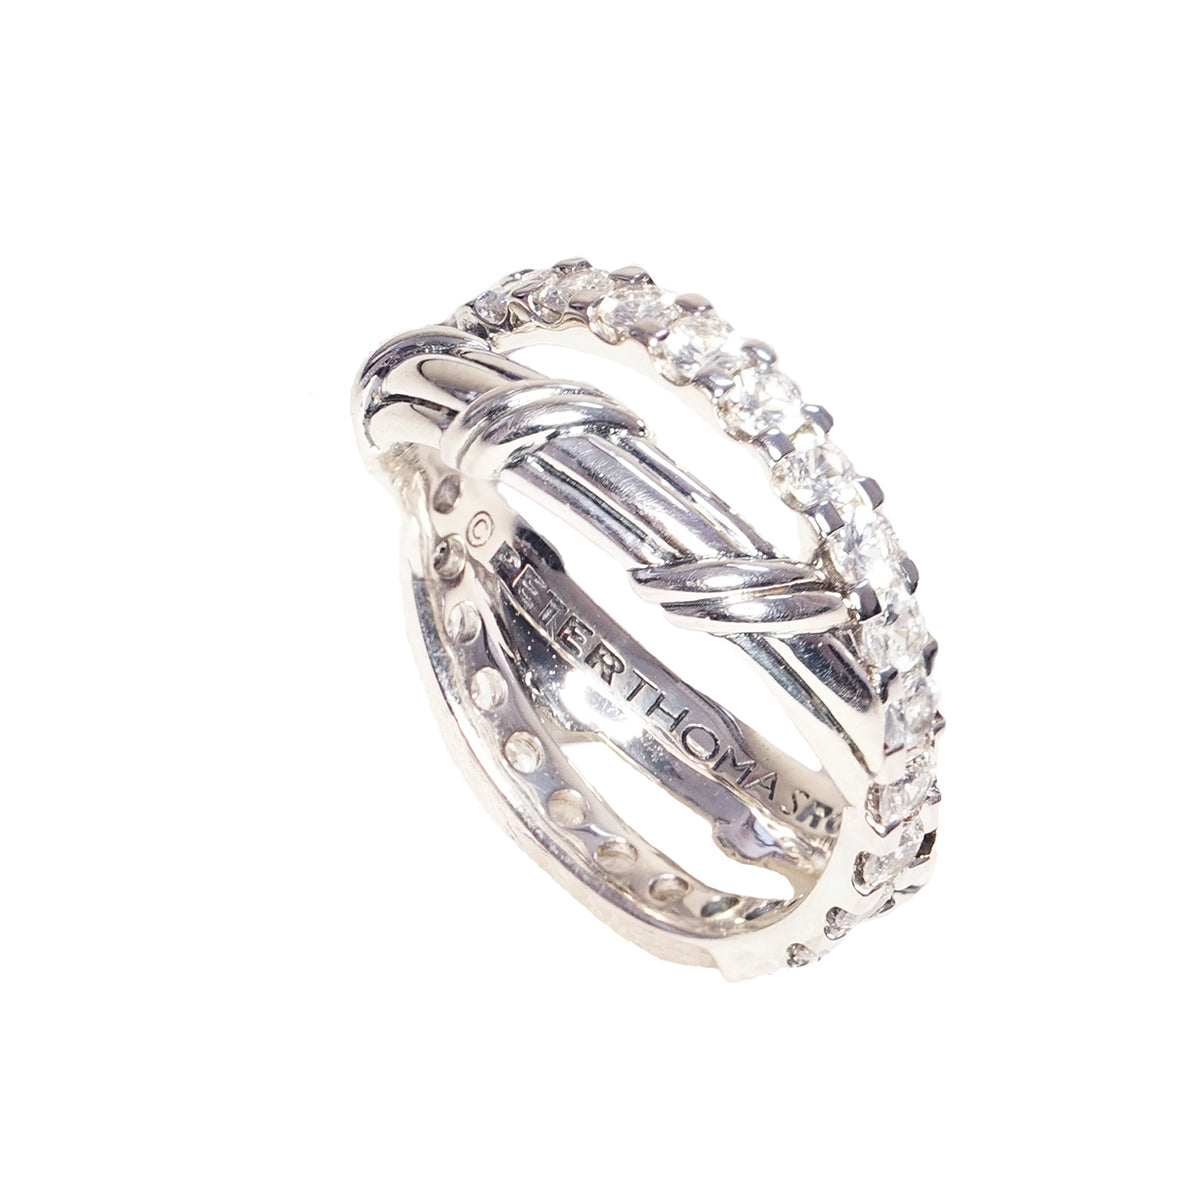 Signature Classic Criss Cross Ring with white topaz in sterling silver